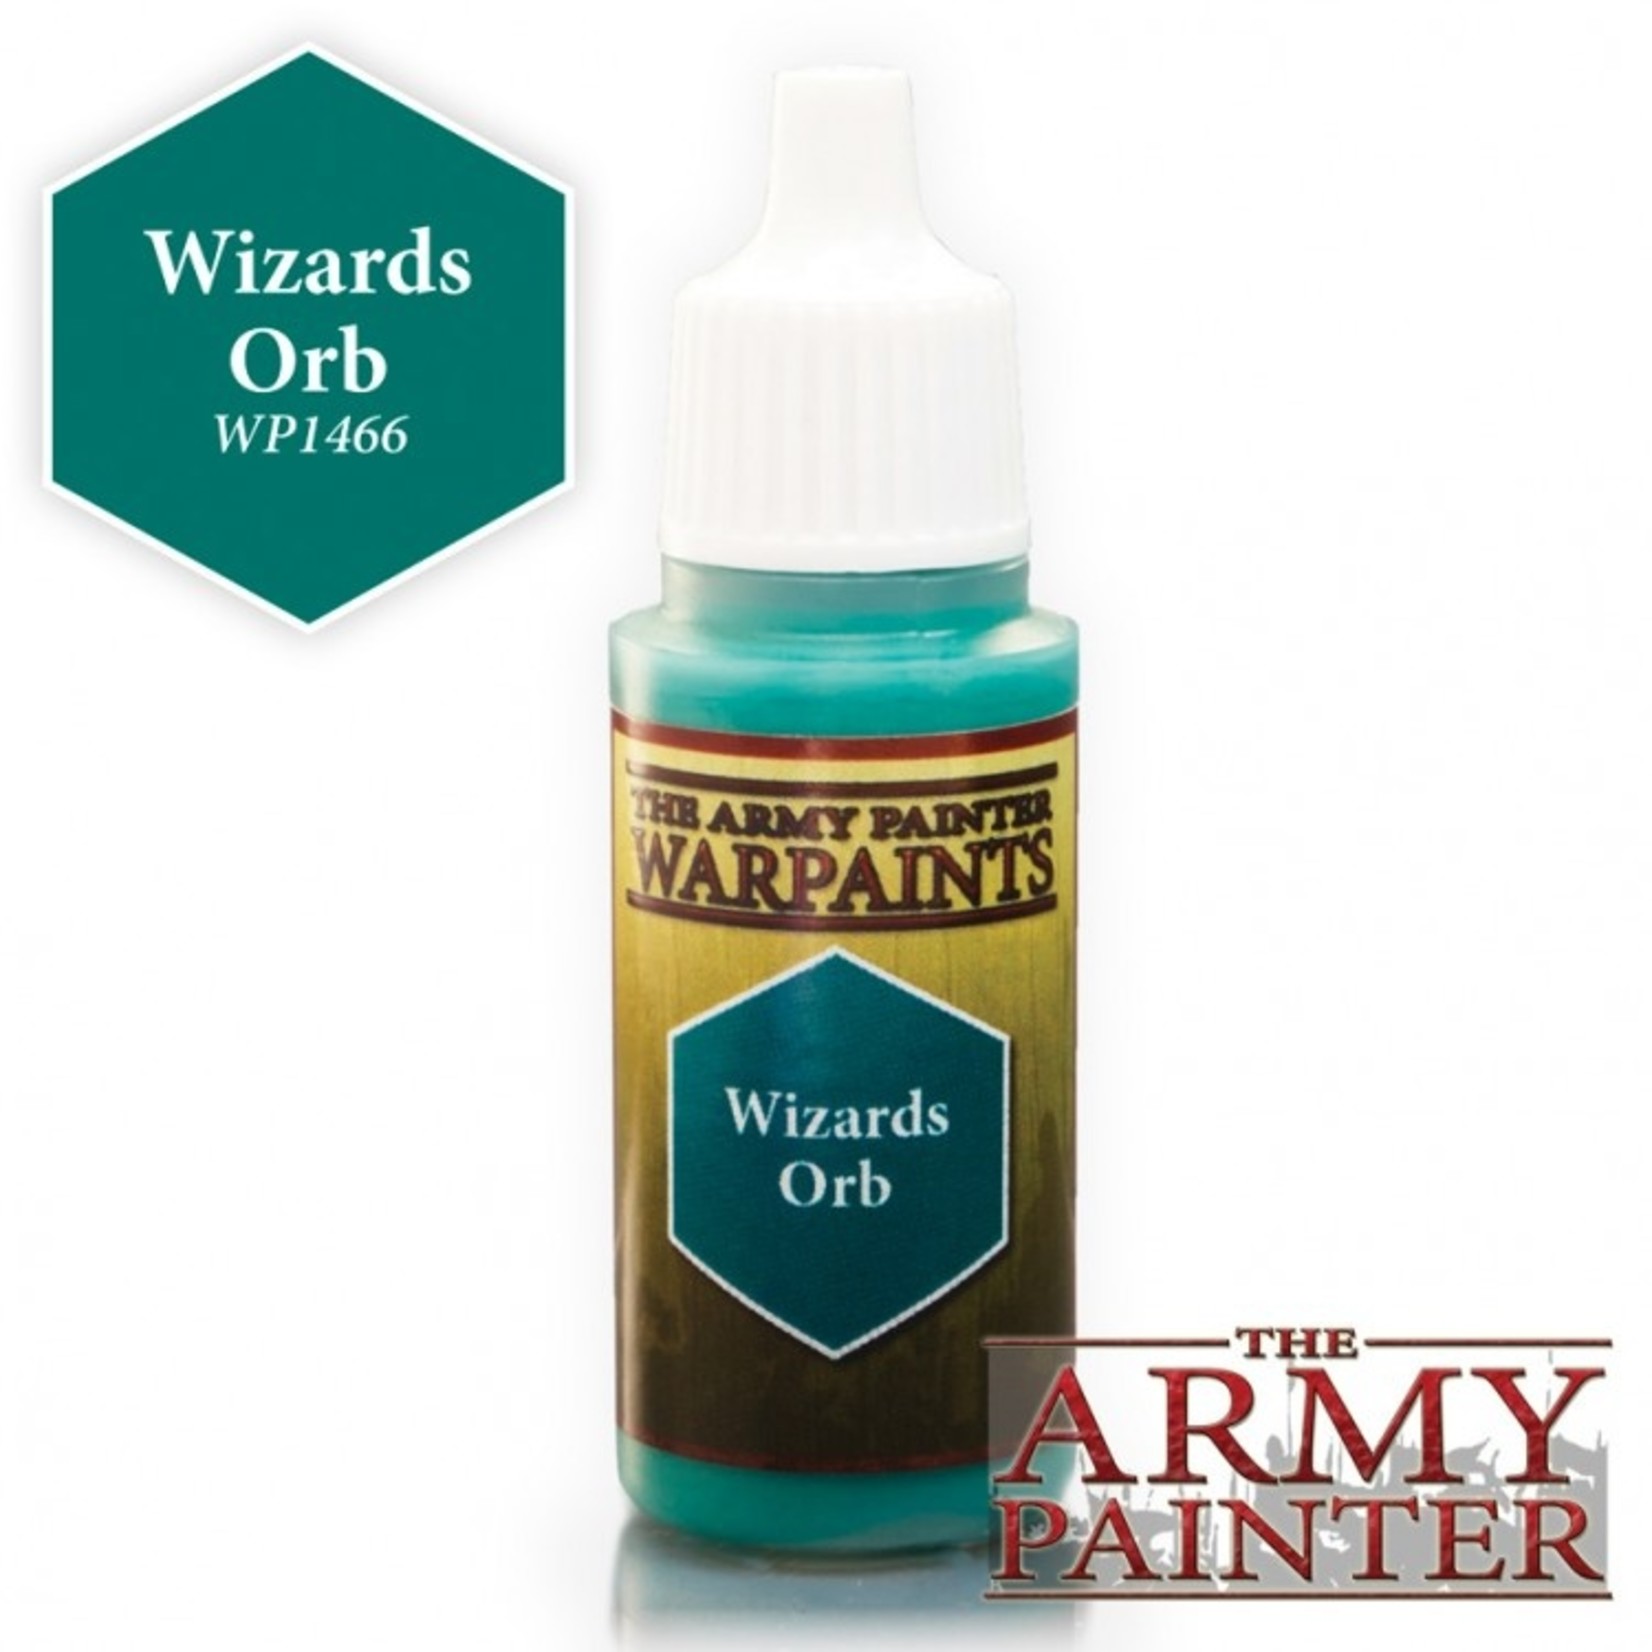 The Army Painter The Army Painter Wizards Orb 18ml